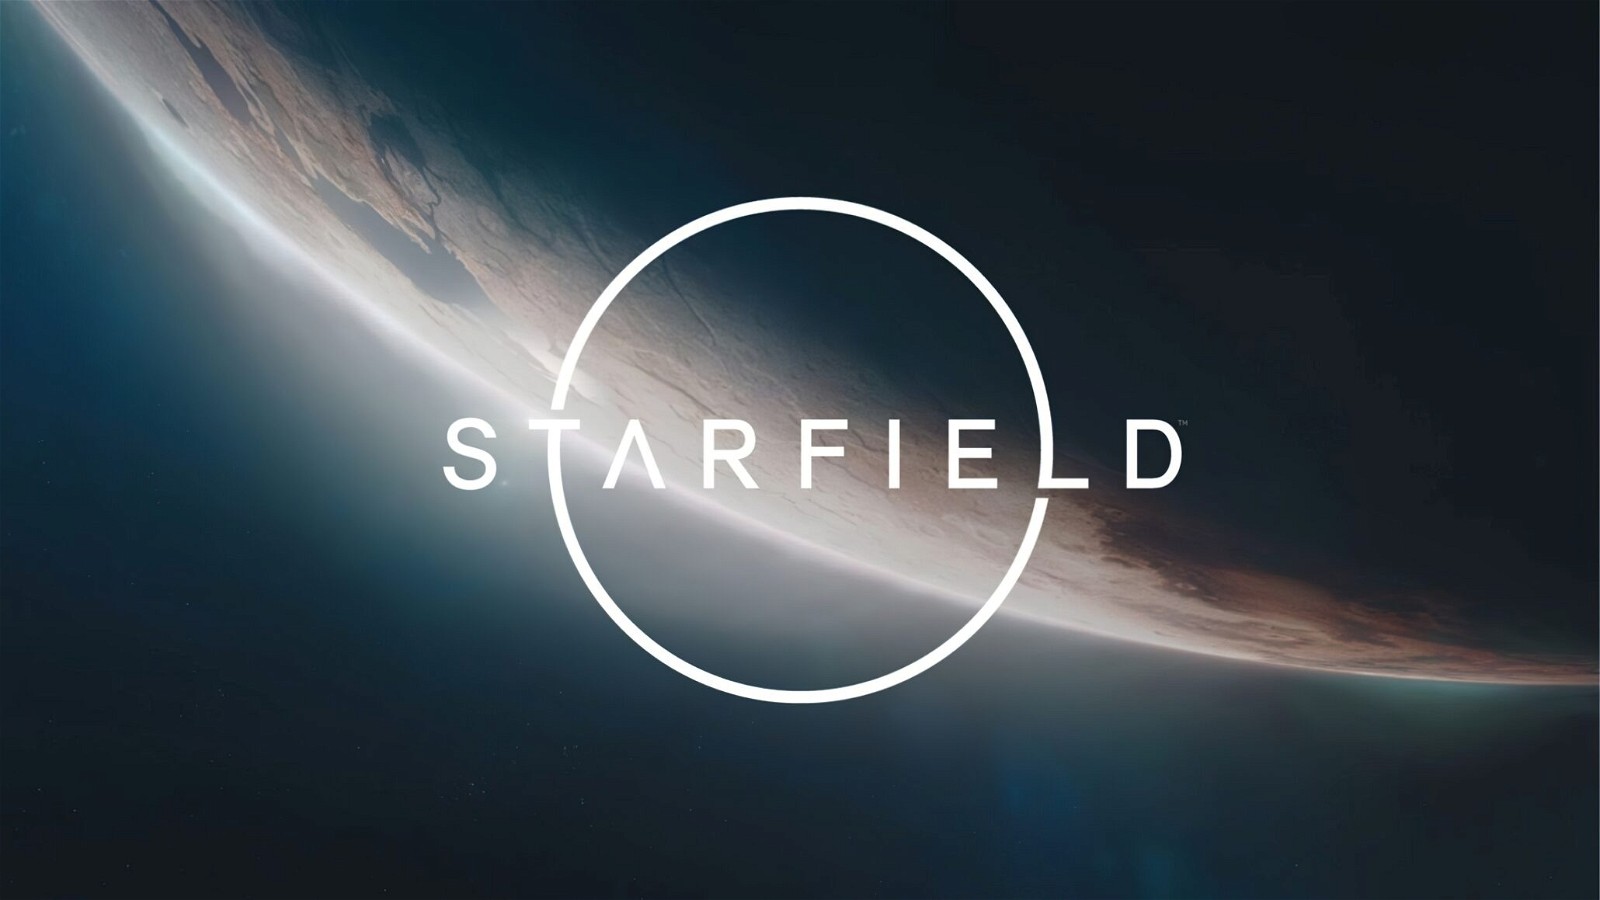 Starfield is only available on PC and Xbox consoles